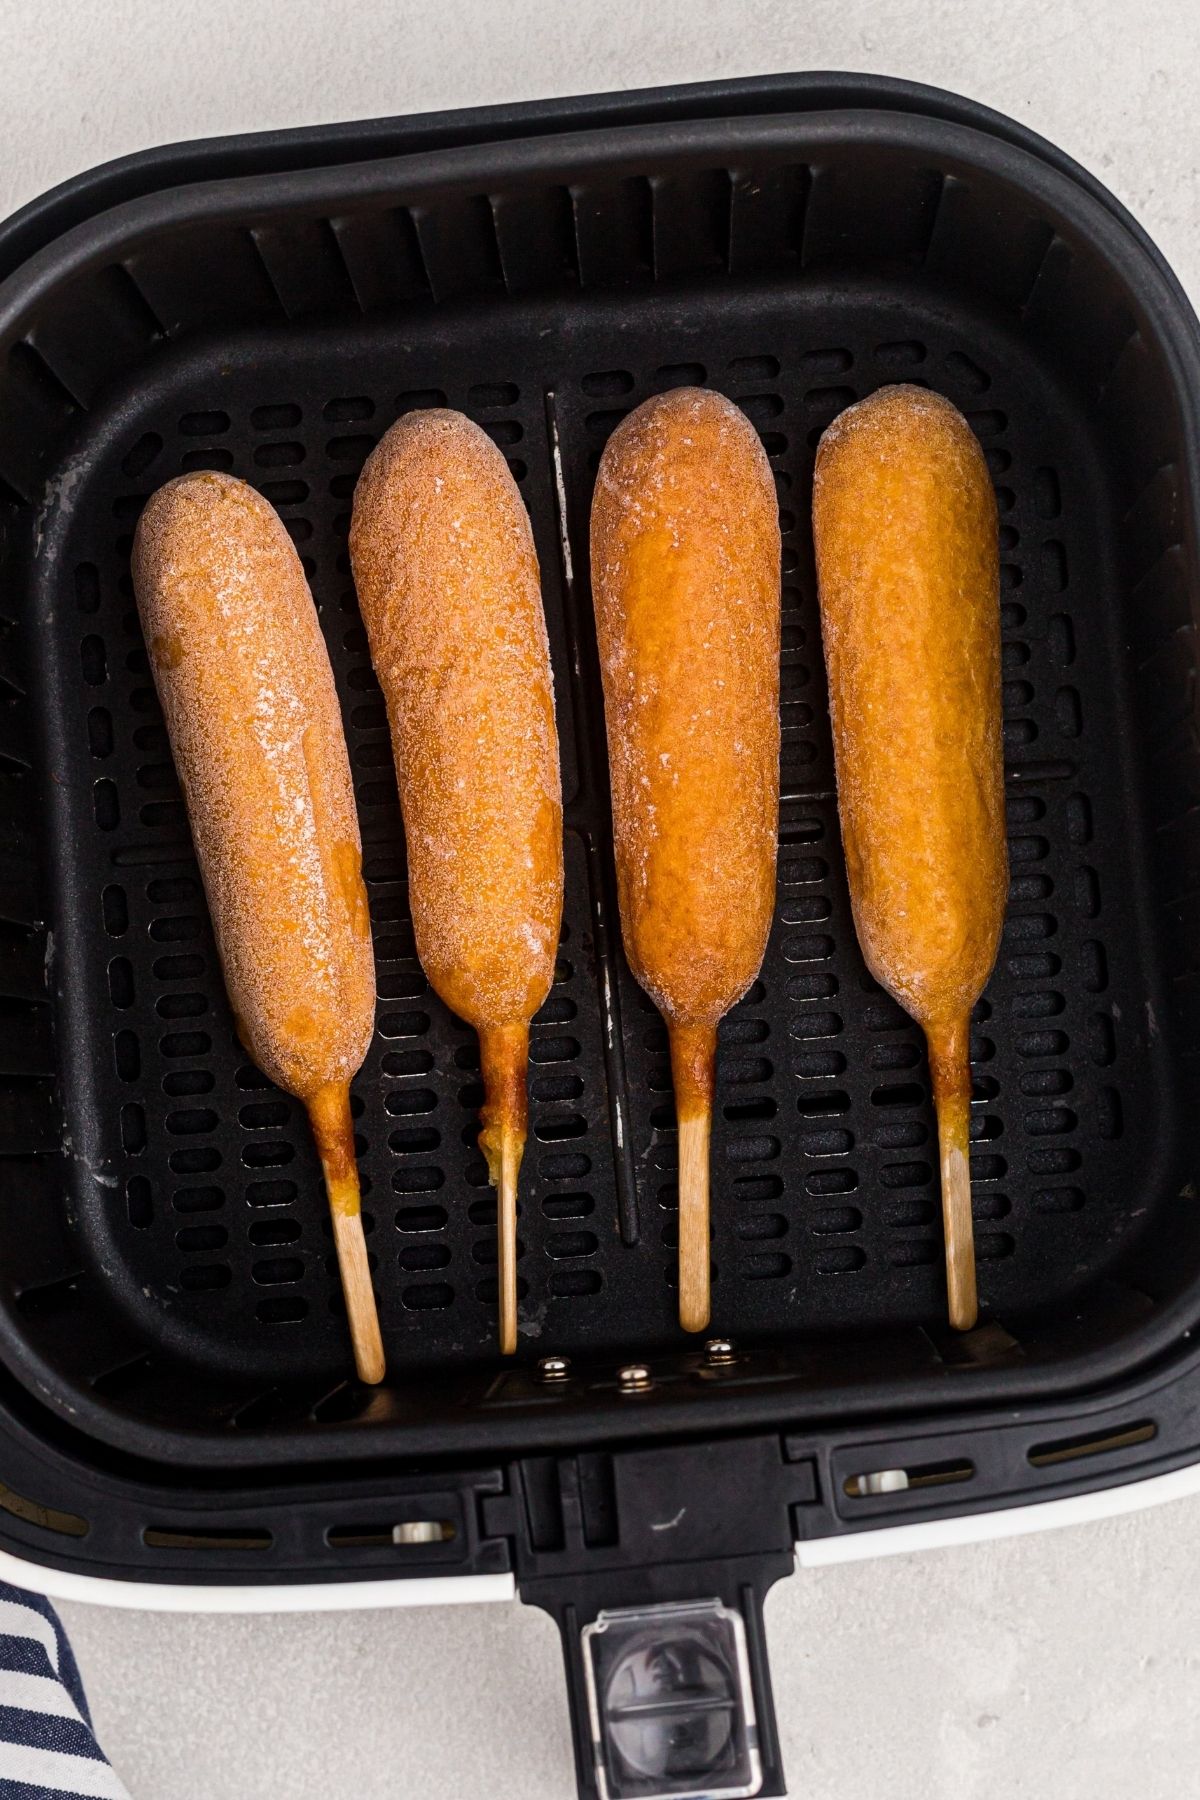 Four frozen corn dogs in an air fryer basket before being cooked